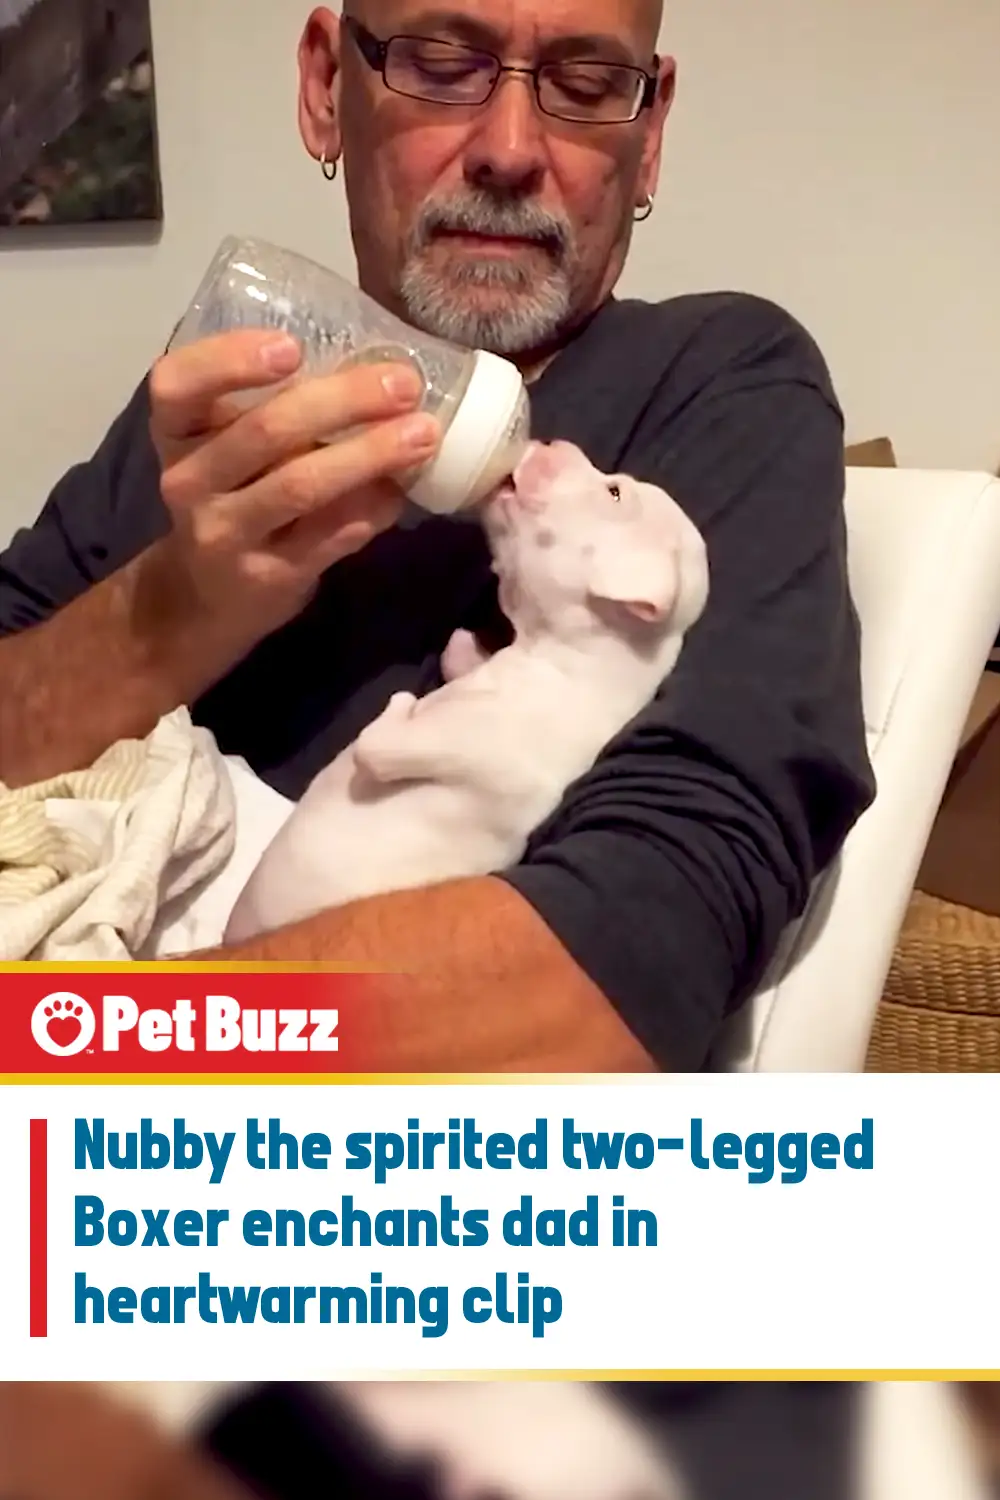 Nubby the spirited two-legged Boxer enchants dad in heartwarming clip